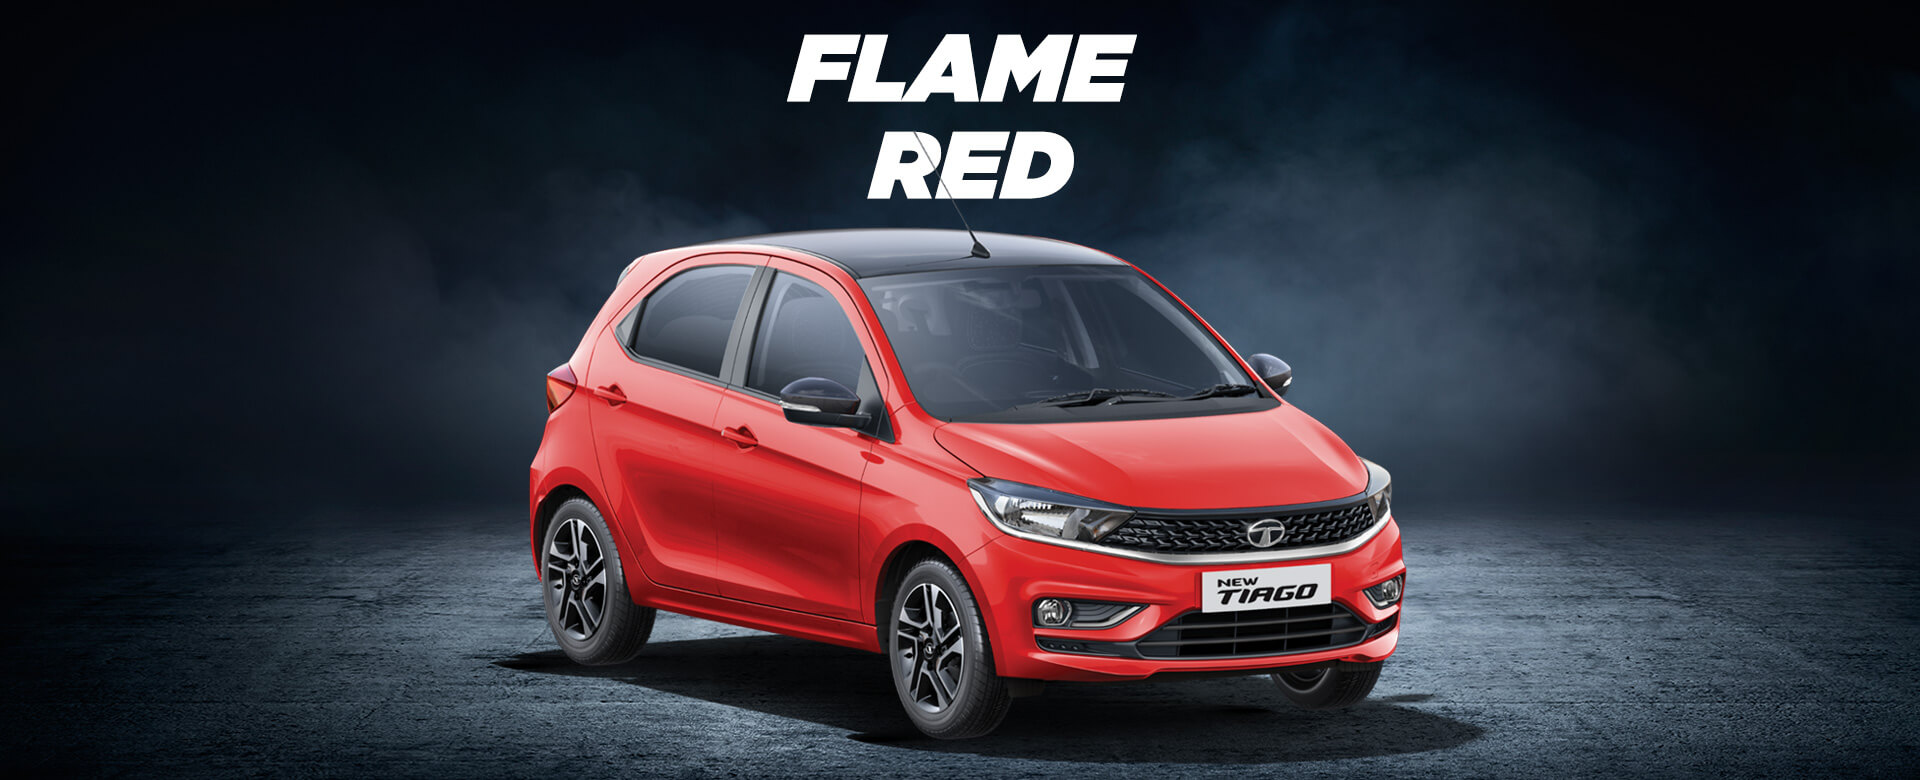 Tata Tiago Standard and Tiago NRG Variant-Wise Price List in India - landscape